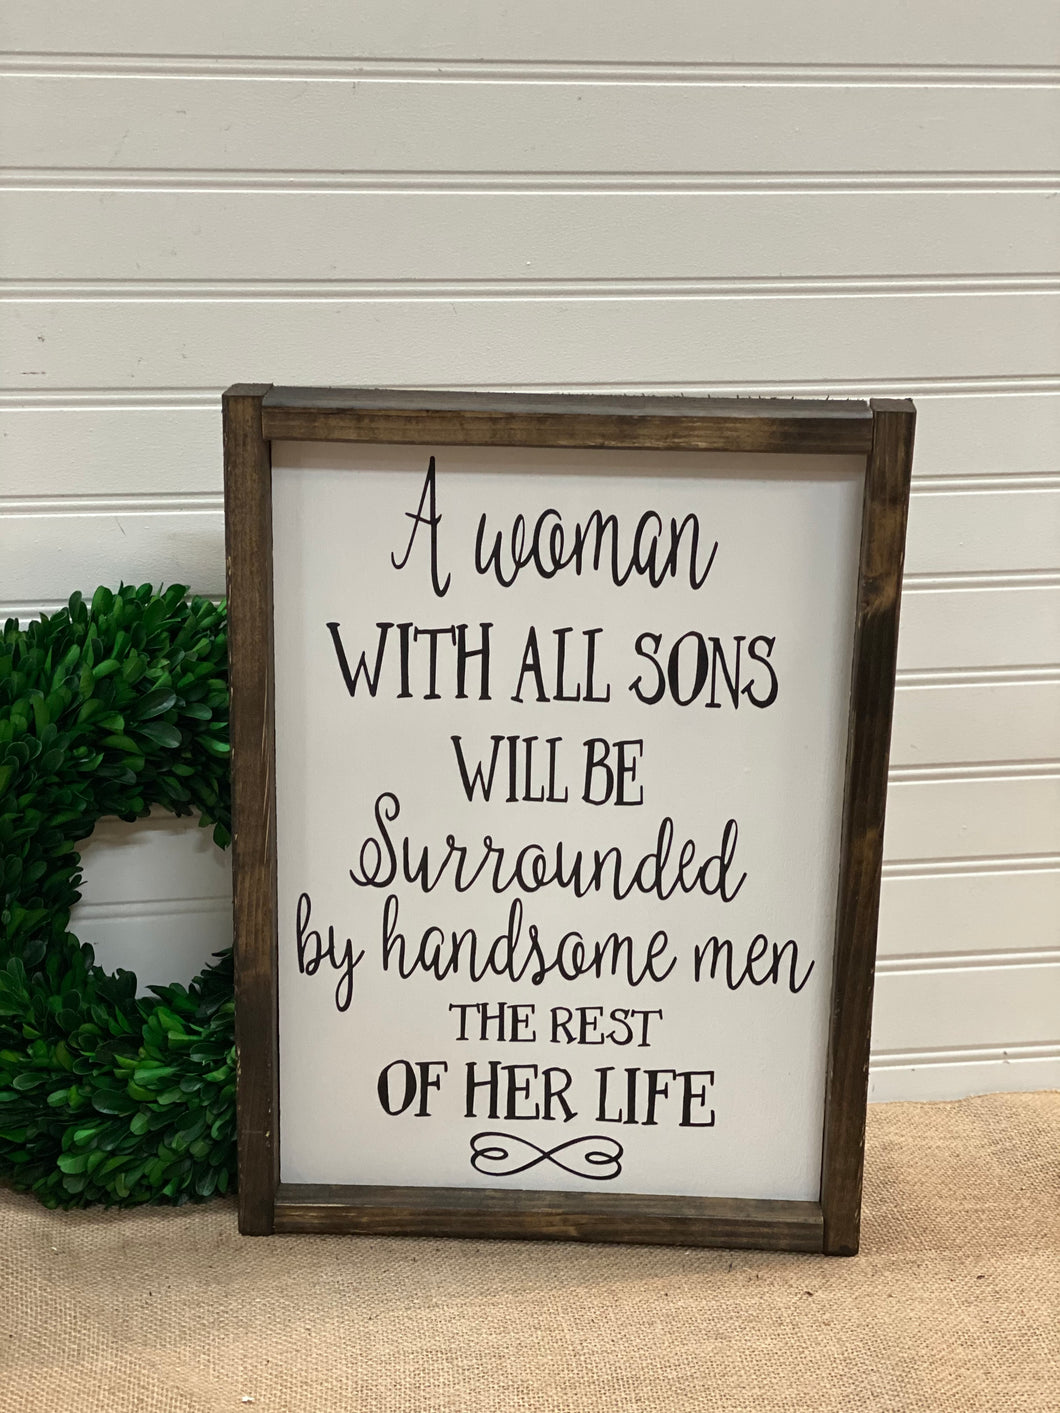 A Woman With All Sons Will Be Surrounded by handsome men the rest of her life